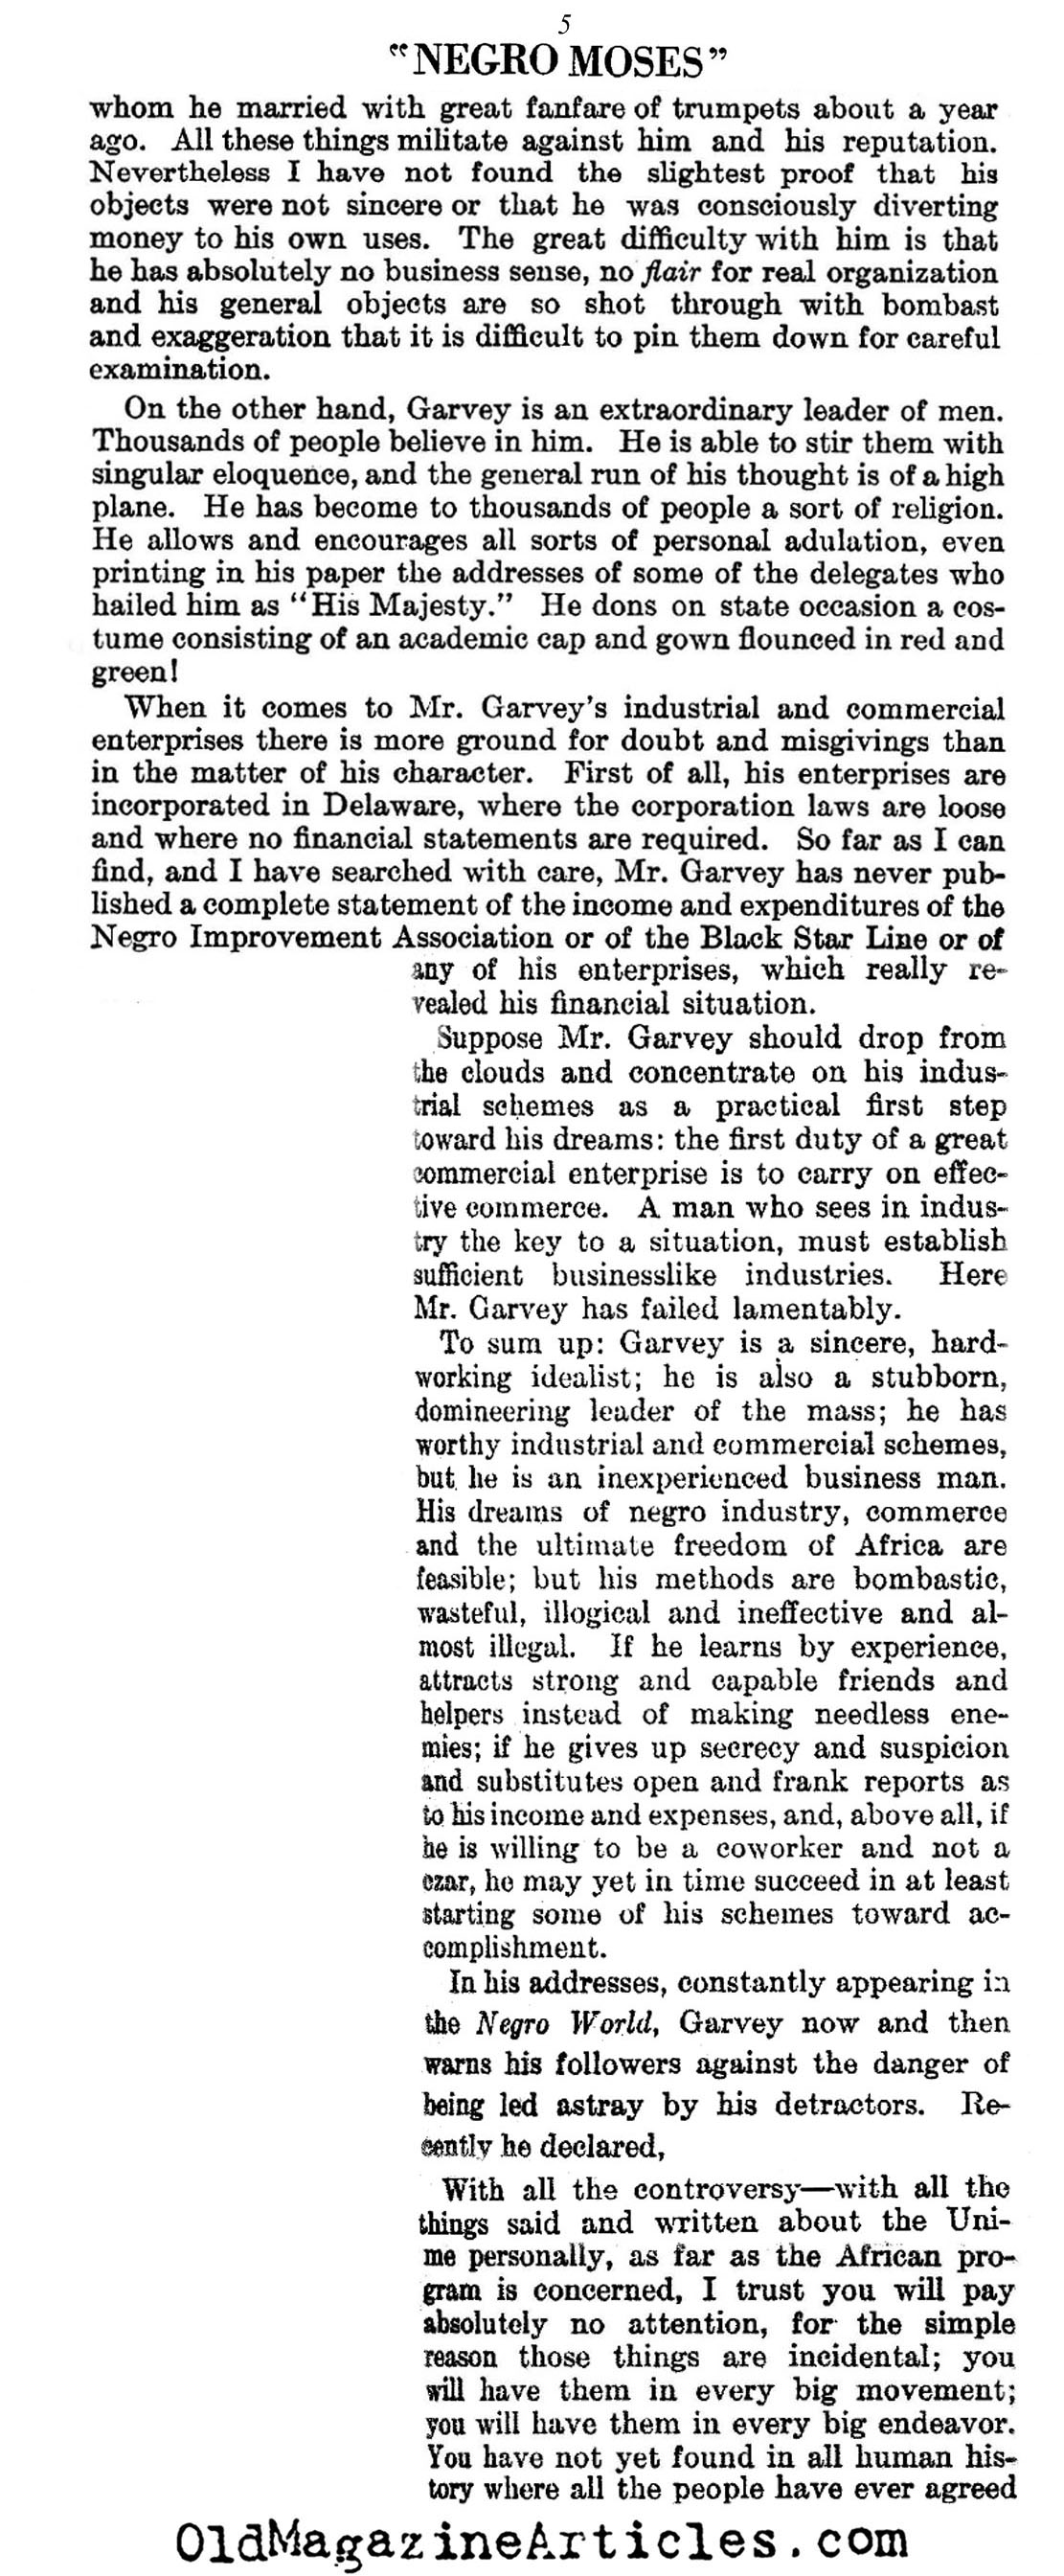 Marcus Garvey:  The Negro Moses (Literary Digest, 1922)